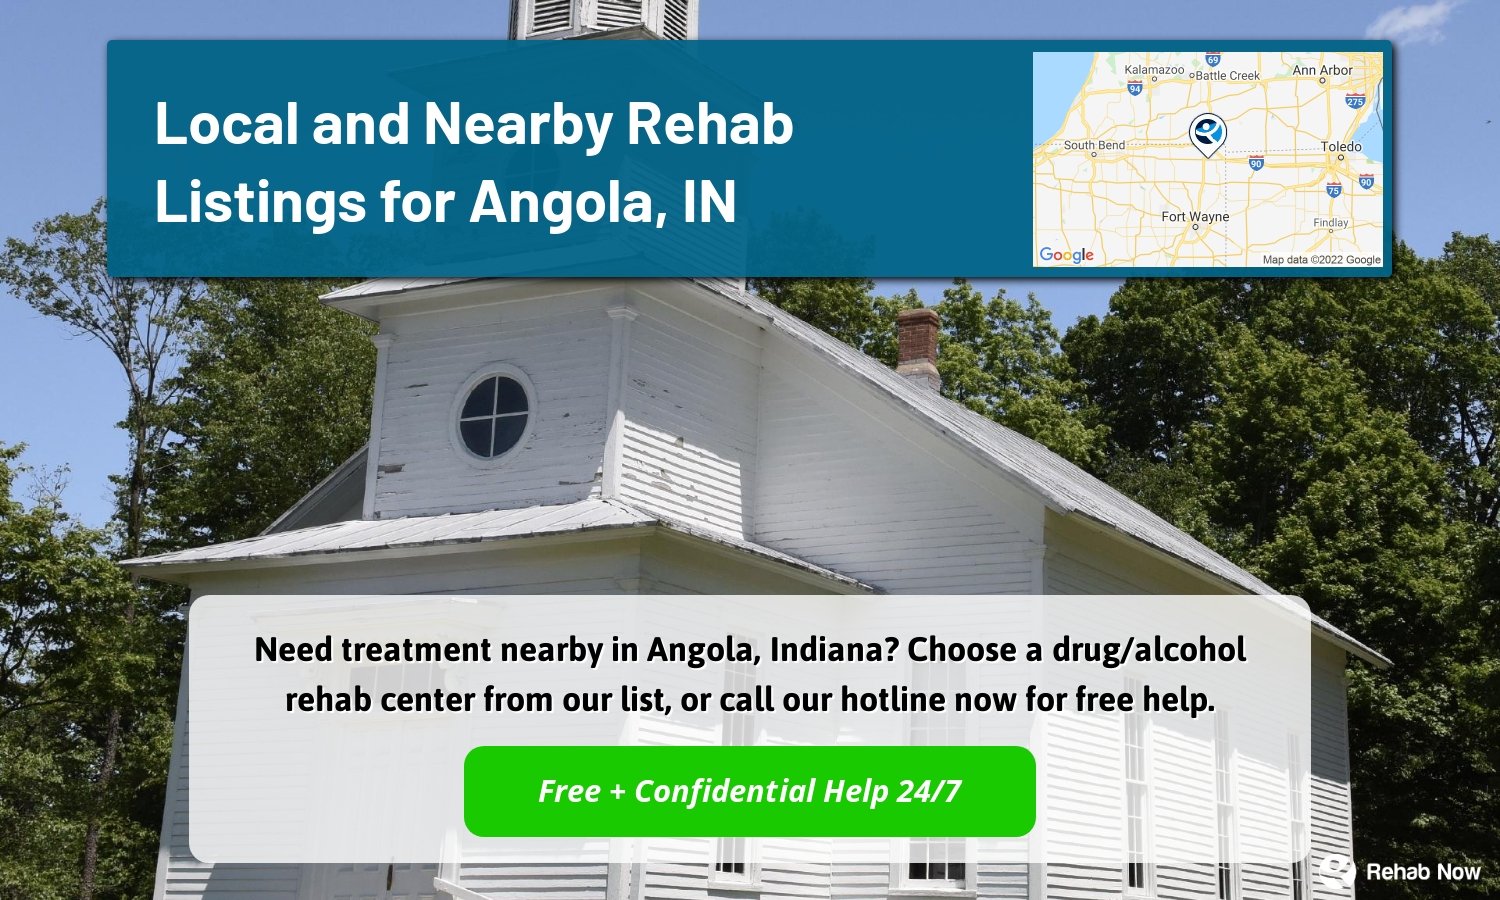 Need treatment nearby in Angola, Indiana? Choose a drug/alcohol rehab center from our list, or call our hotline now for free help.